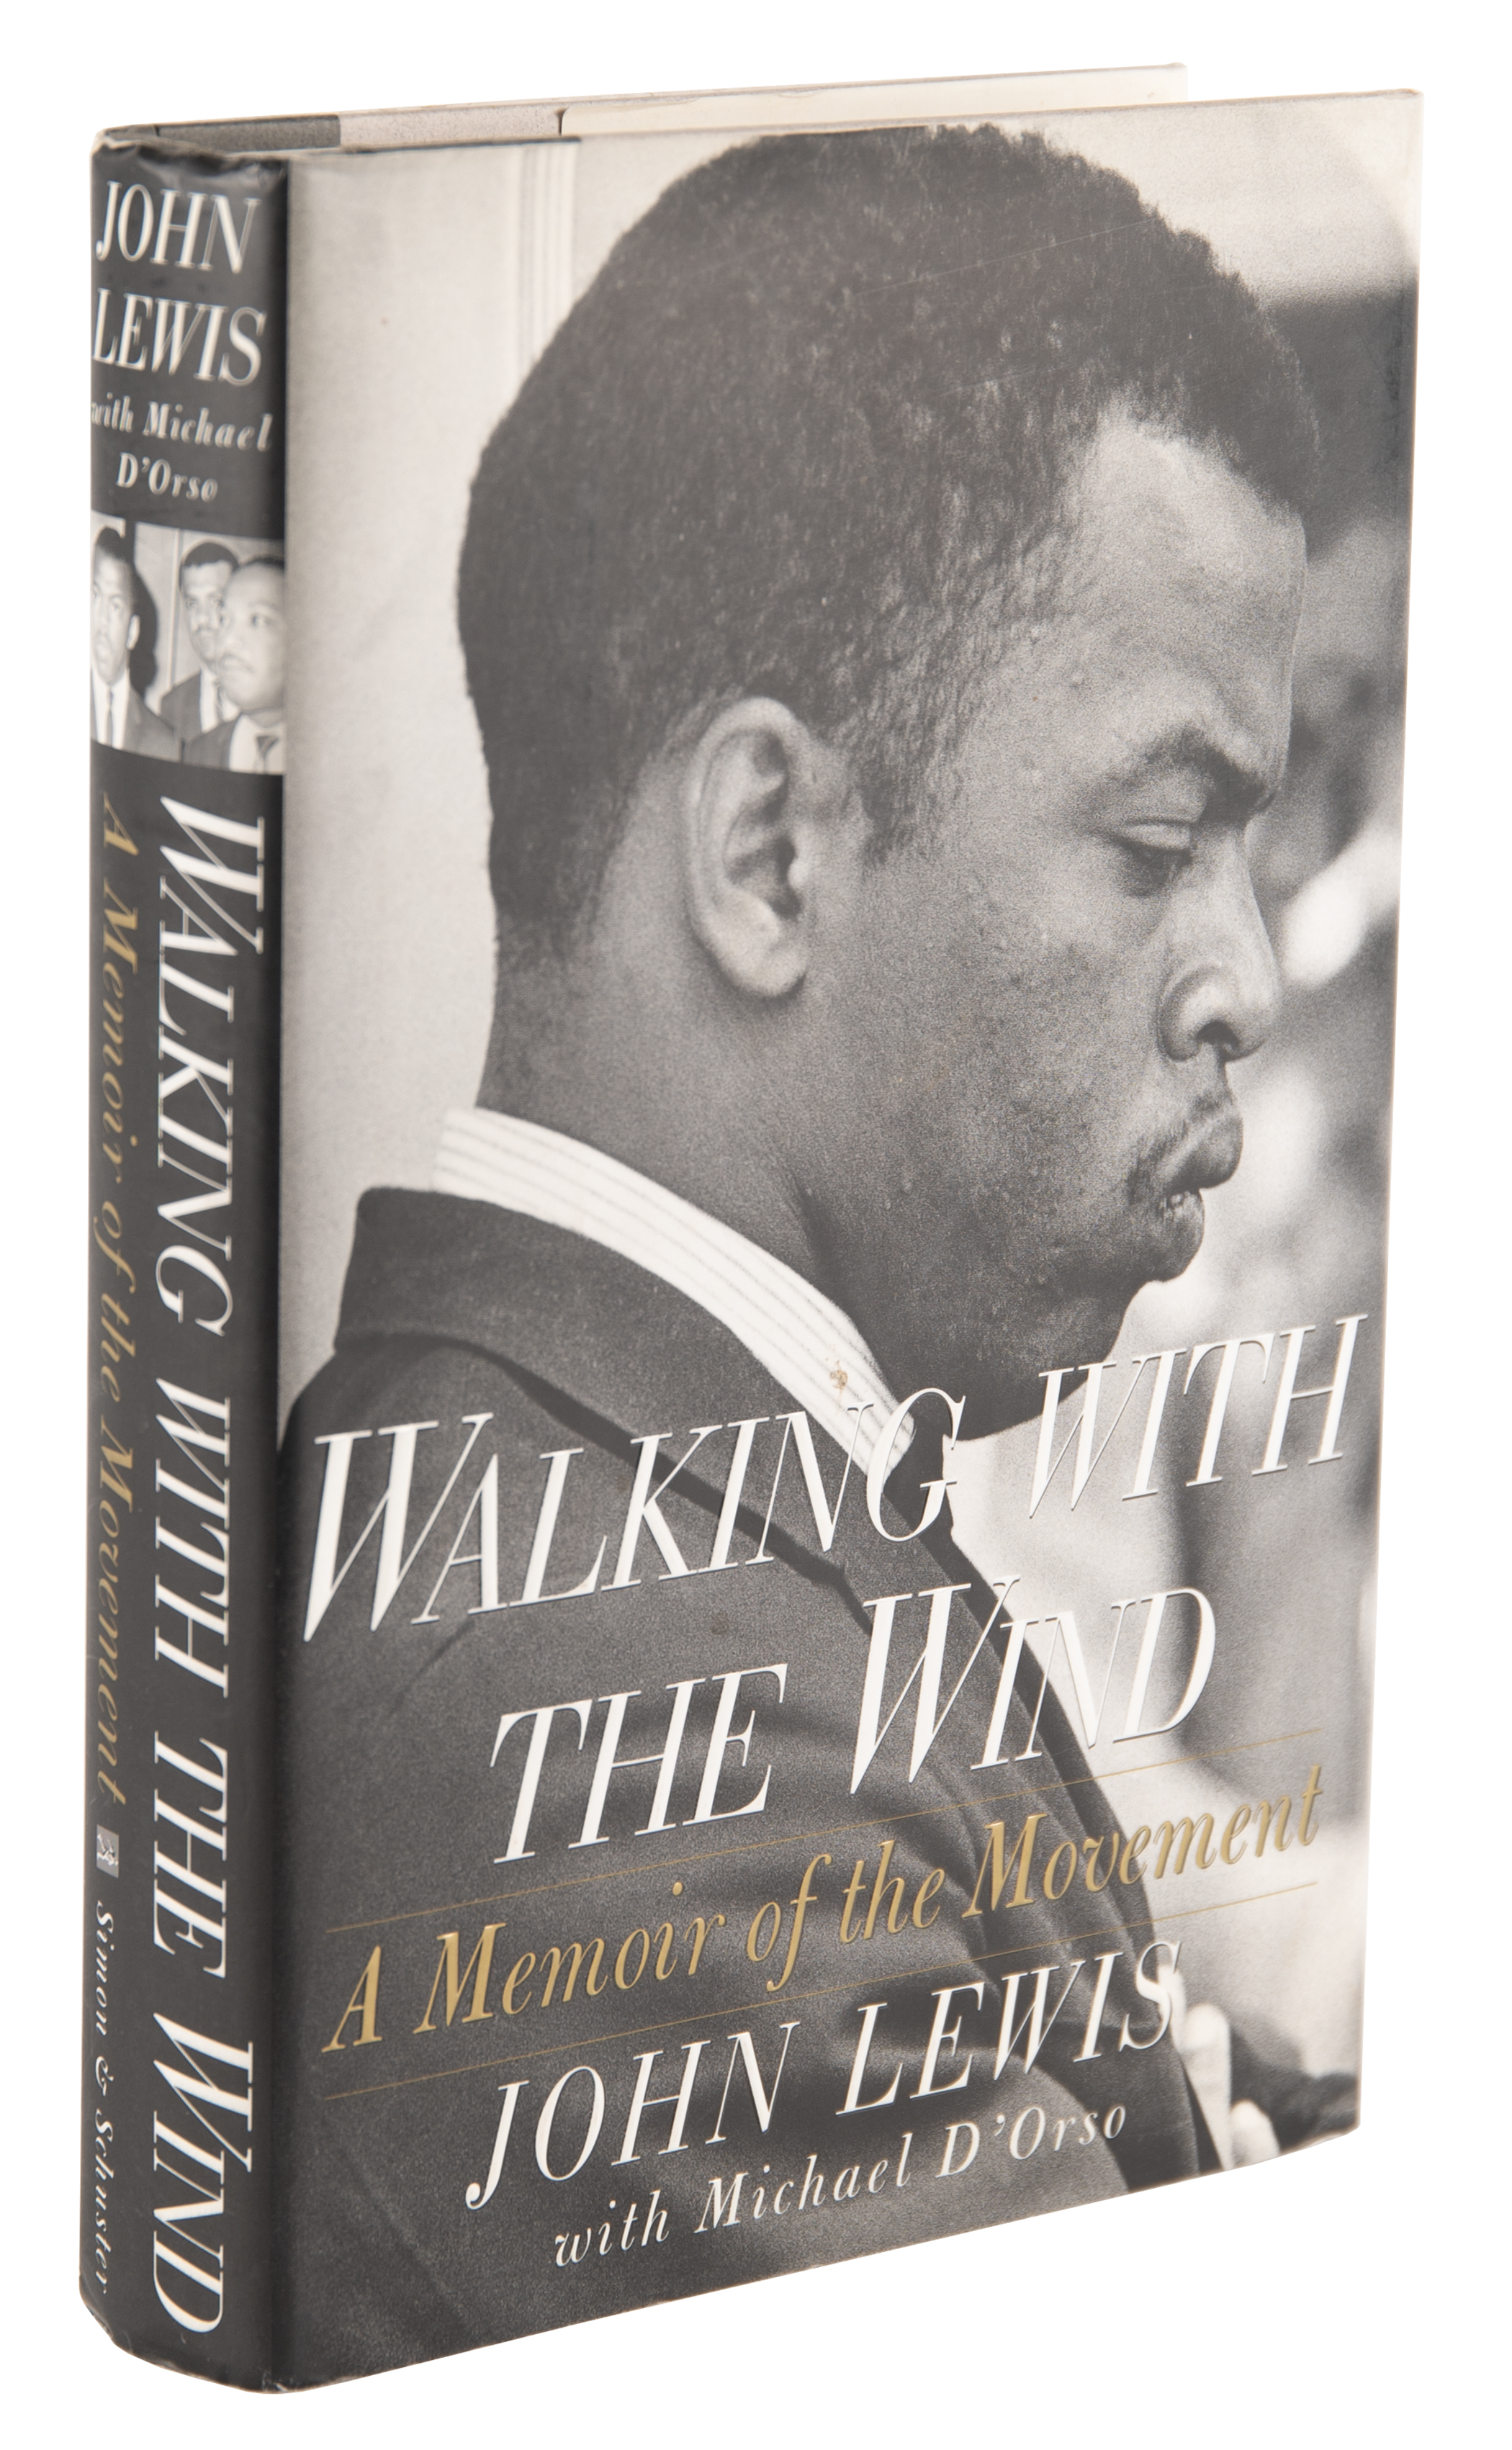 Lot #371 John Lewis Signed Book - Walking With the Wind - Image 3